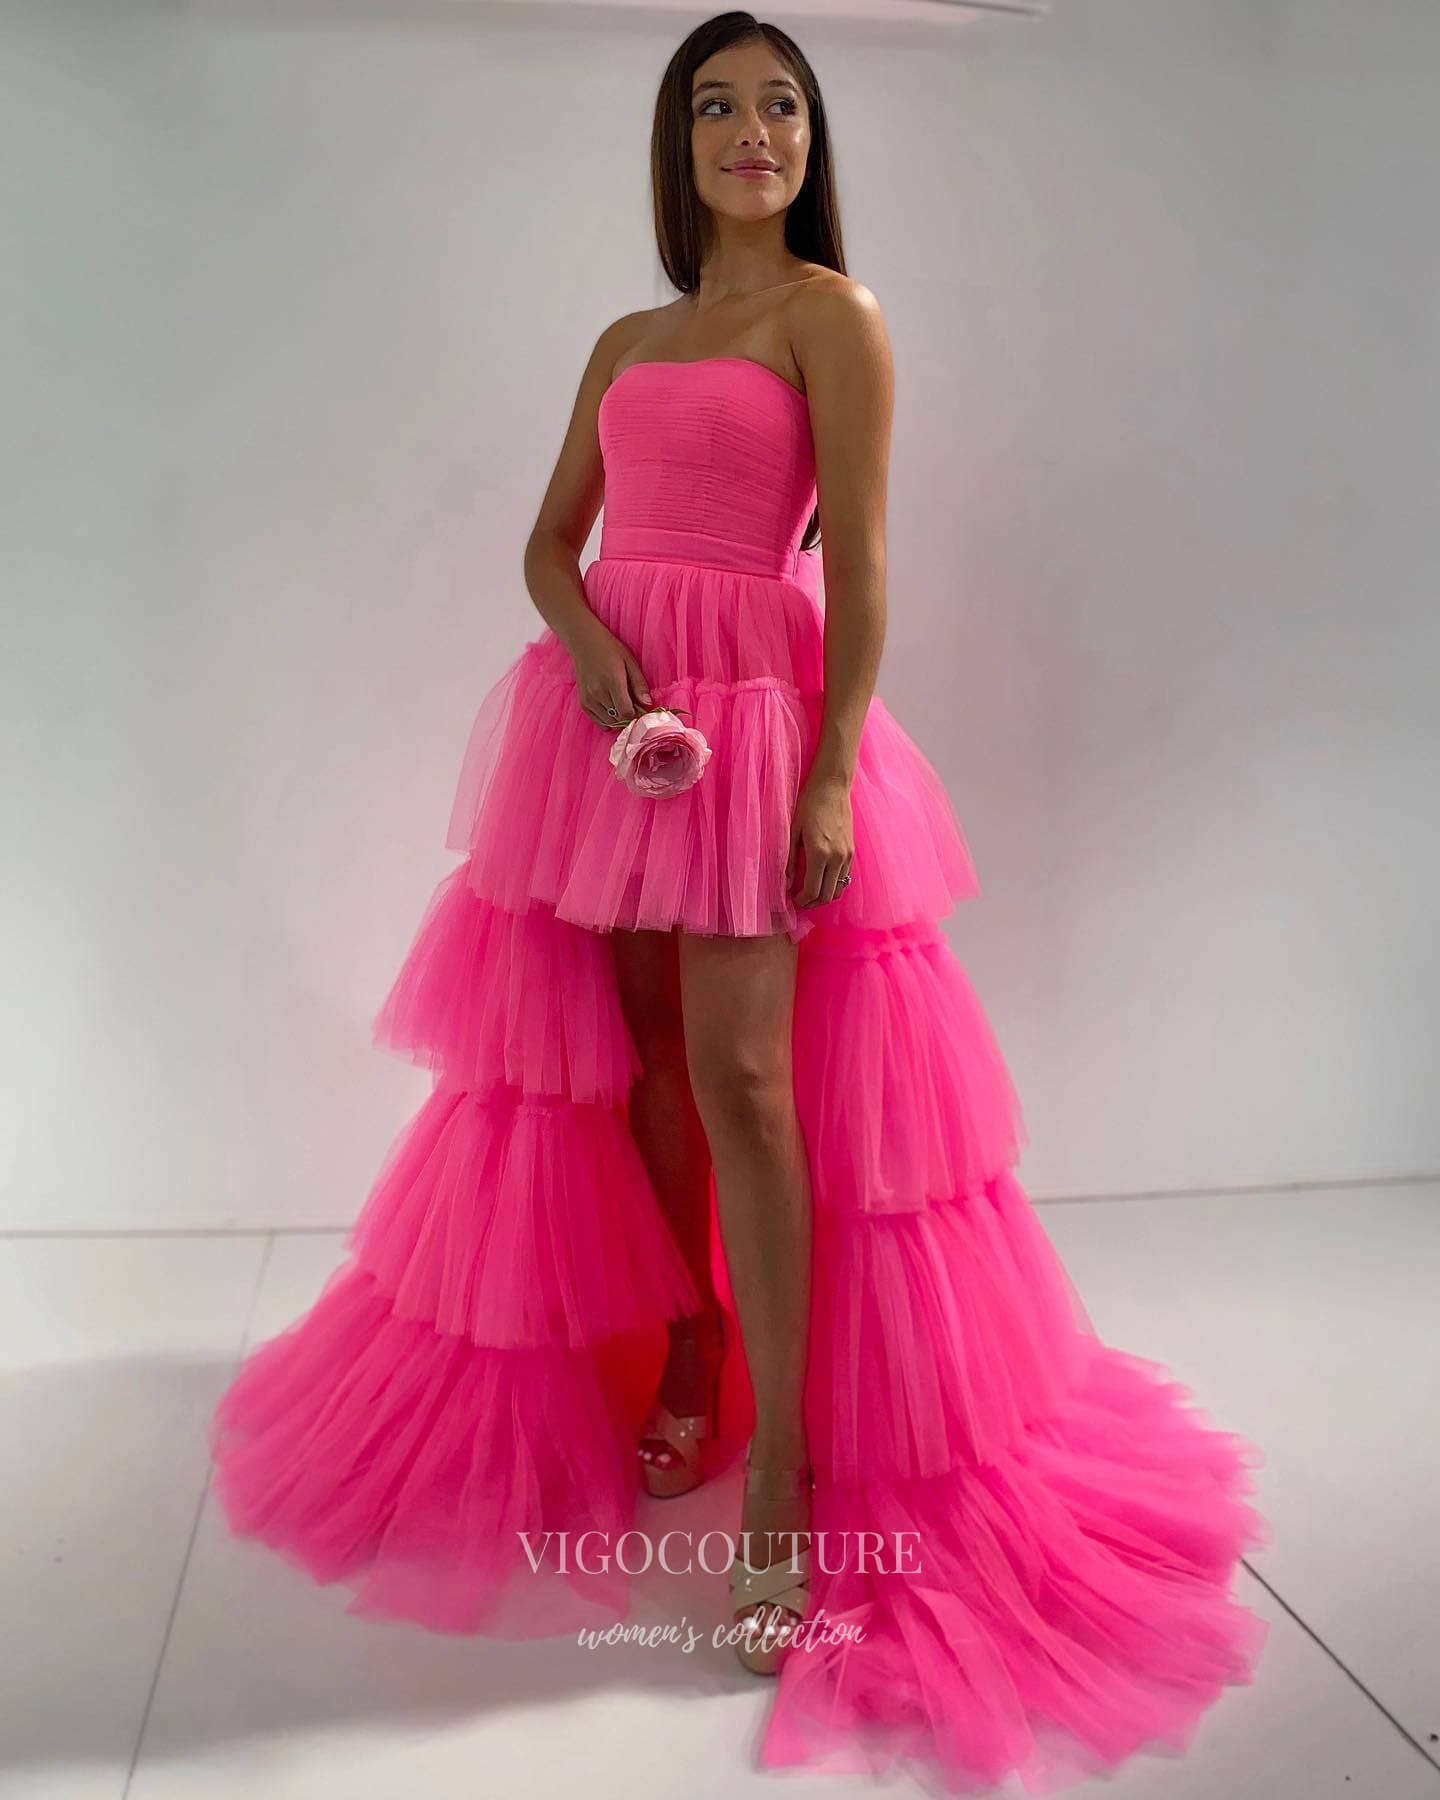 Fuchsia Ruffled Tulle Prom Dresses Strapless High-Low Formal Gown 21887-Prom Dresses-vigocouture-Lavender-US2-vigocouture